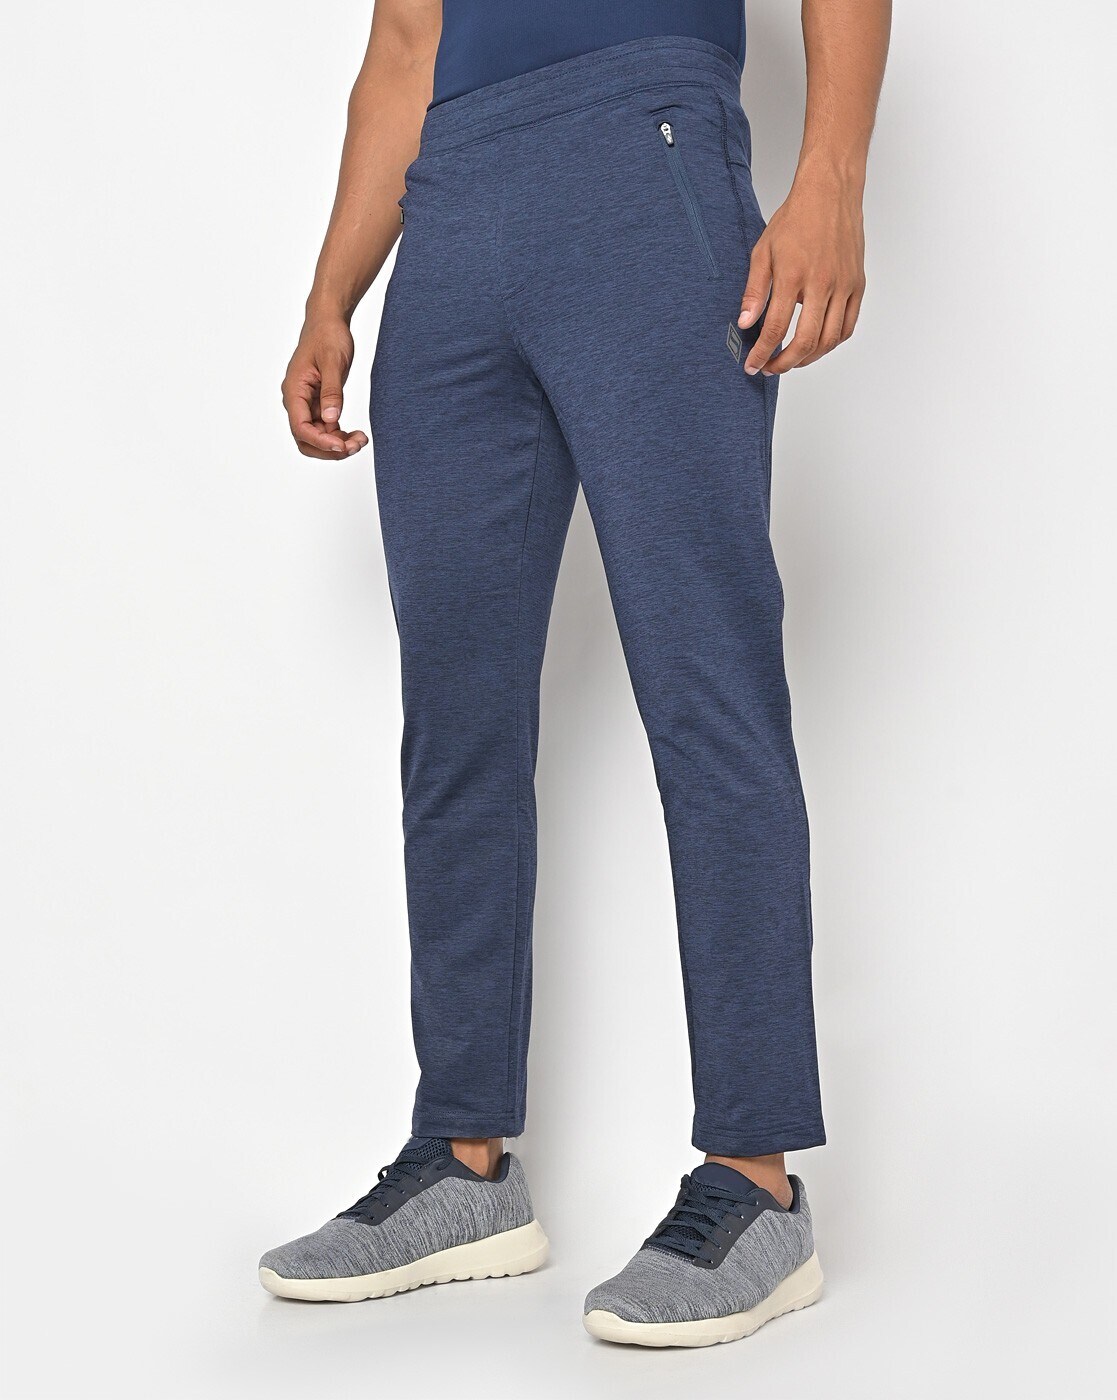 Skechers Expedition Jogger  Light Grey Jogger Pants For Men  India